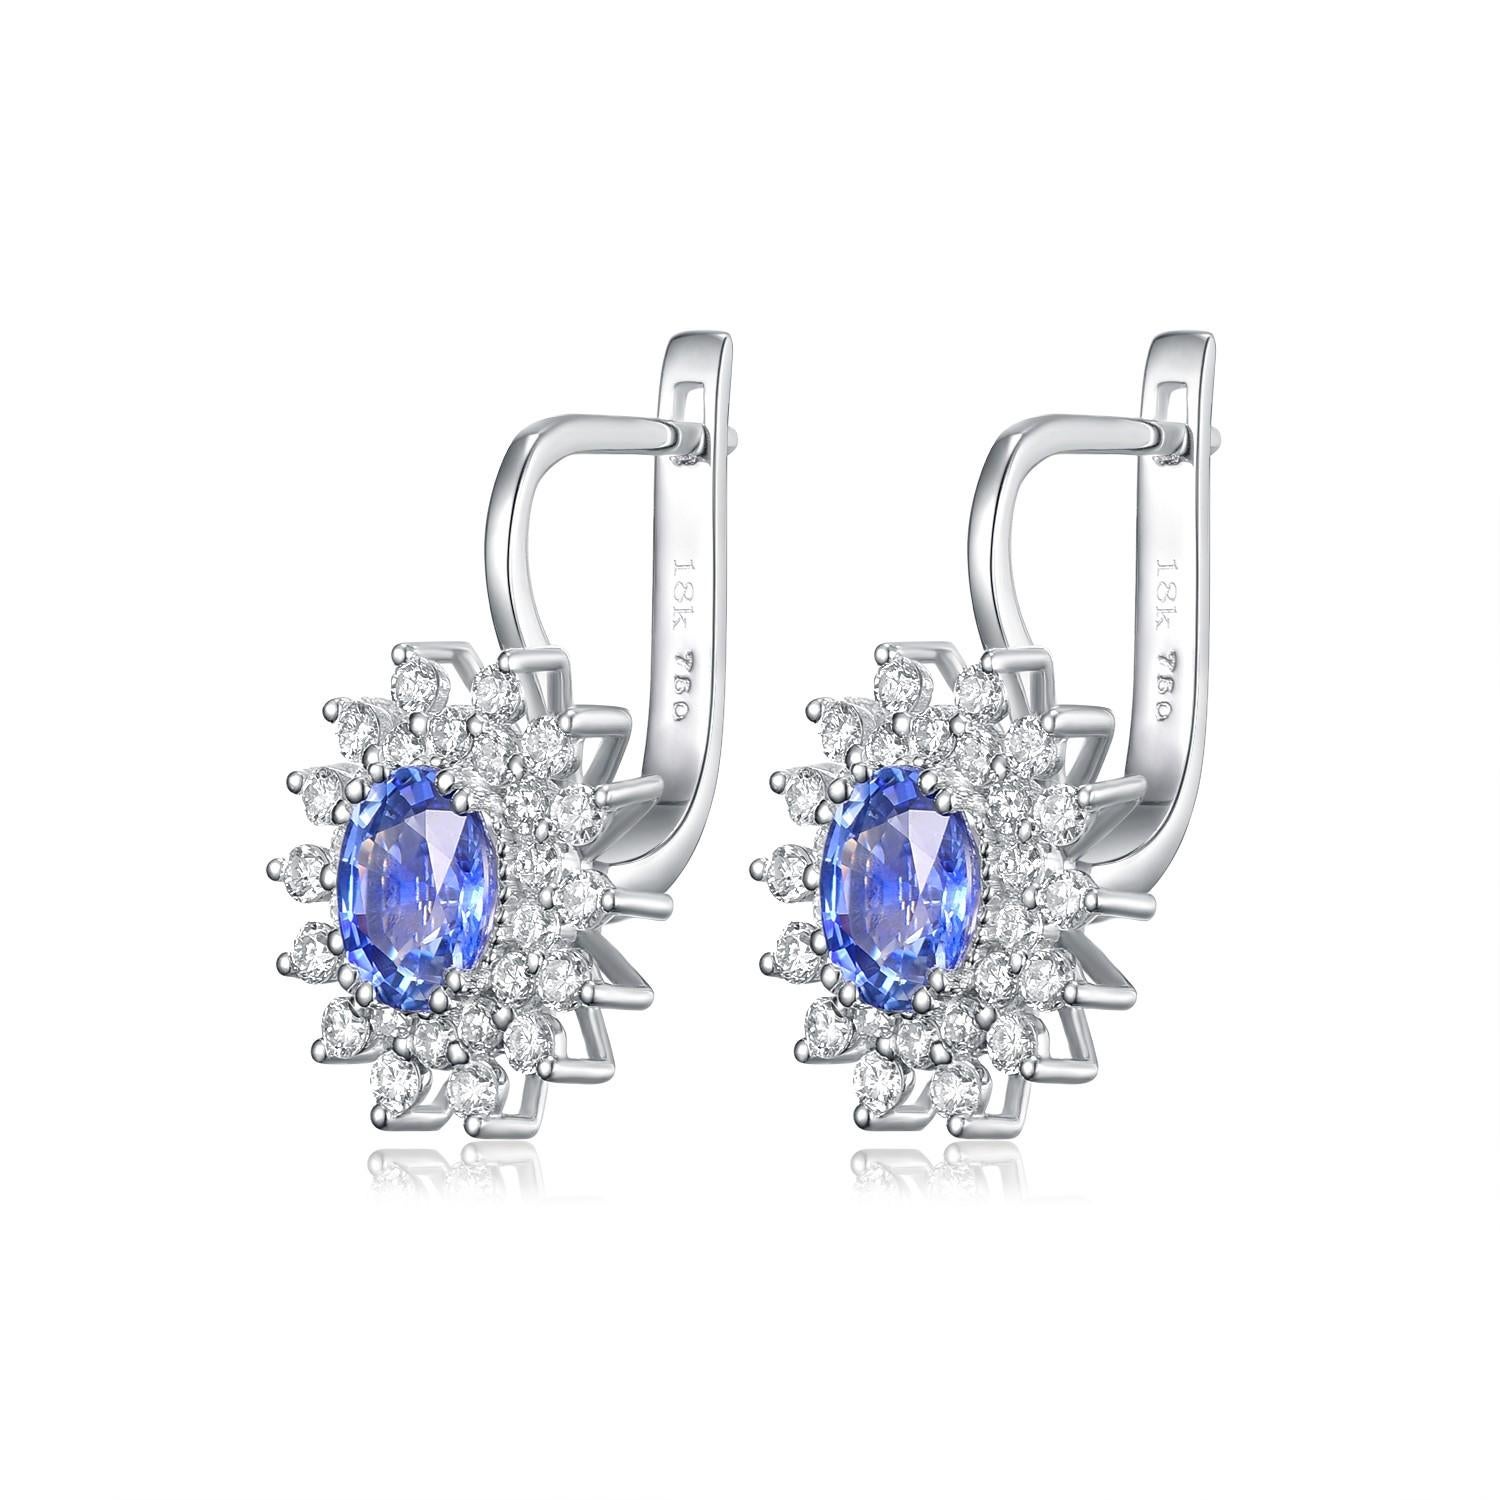 Discover the epitome of elegance with our Blue Sapphire Drop Earrings set in 18 Karat White Gold. These stunning earrings seamlessly unite the timeless allure of blue sapphires with the contemporary sophistication of white gold and diamonds, making